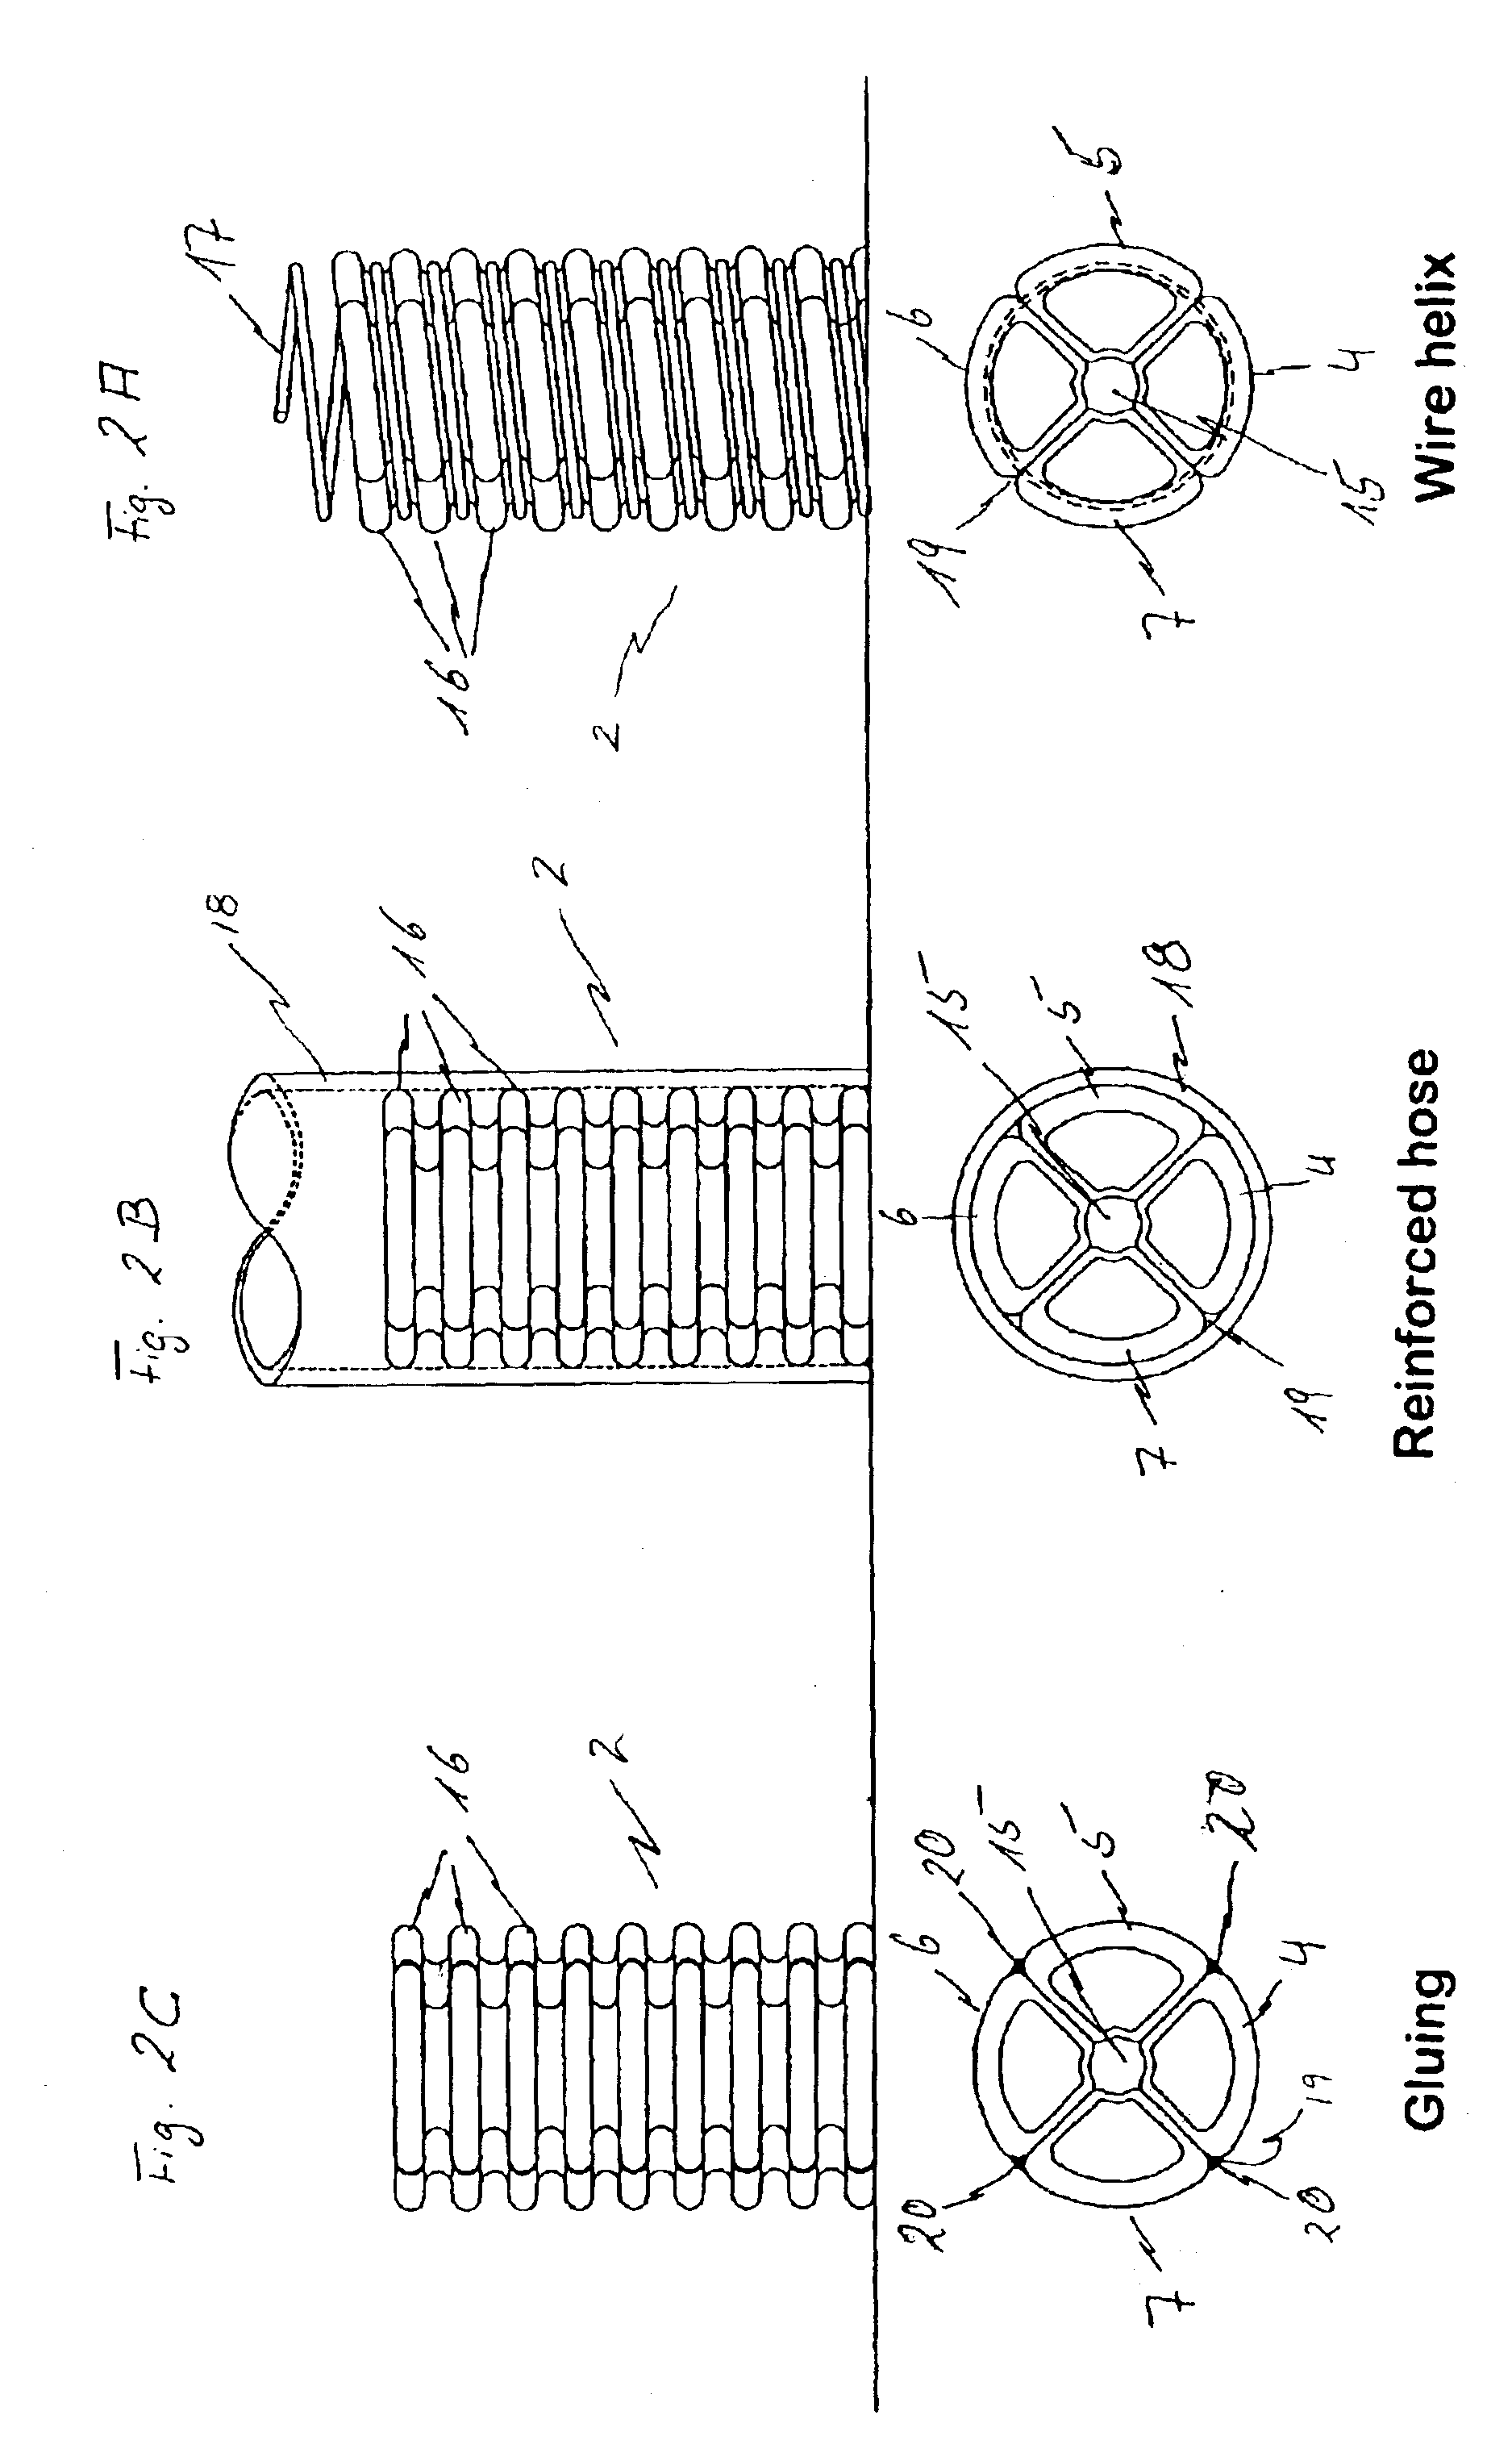 Endoscope shaft comprising a movable end portion